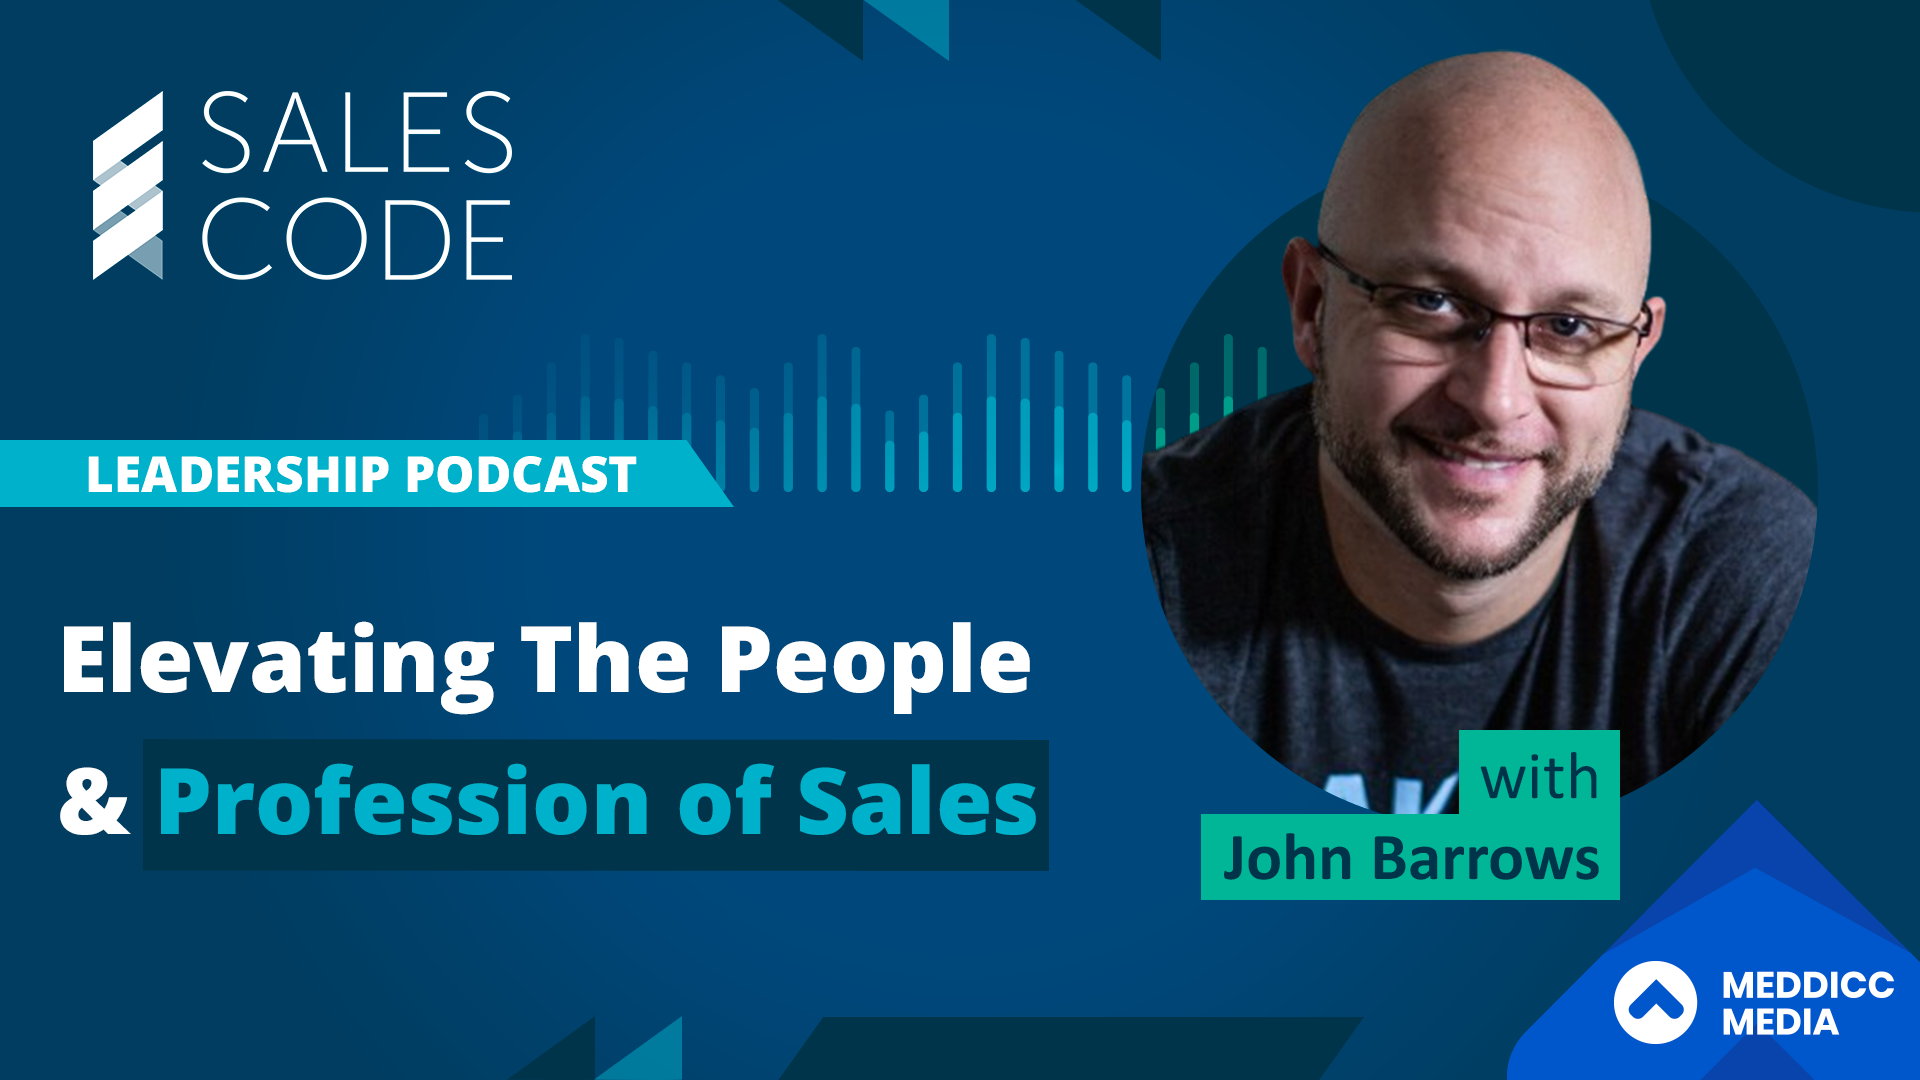 Sales Code: How To Elevate People In Sales With John Barrows